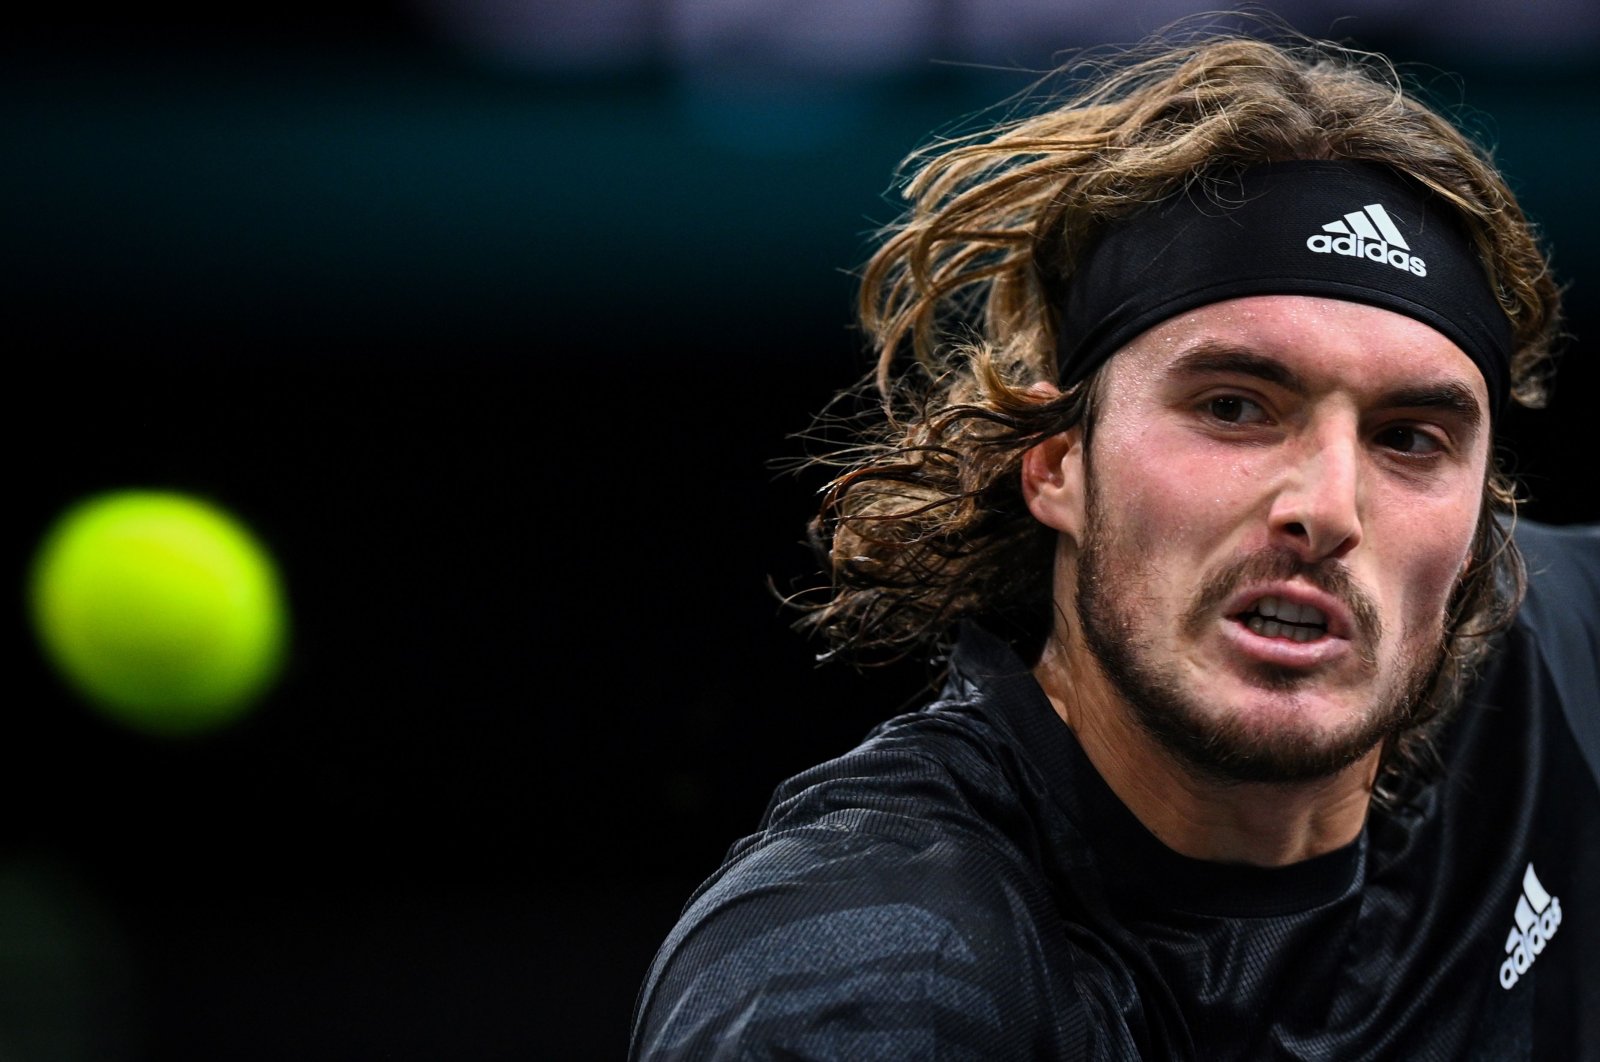 Stefanos Tsitsipas in action during a Paris Masters tennis match against Ugo Humbert, in Paris, France, Nov. 3, 2020. (AFP Photo)